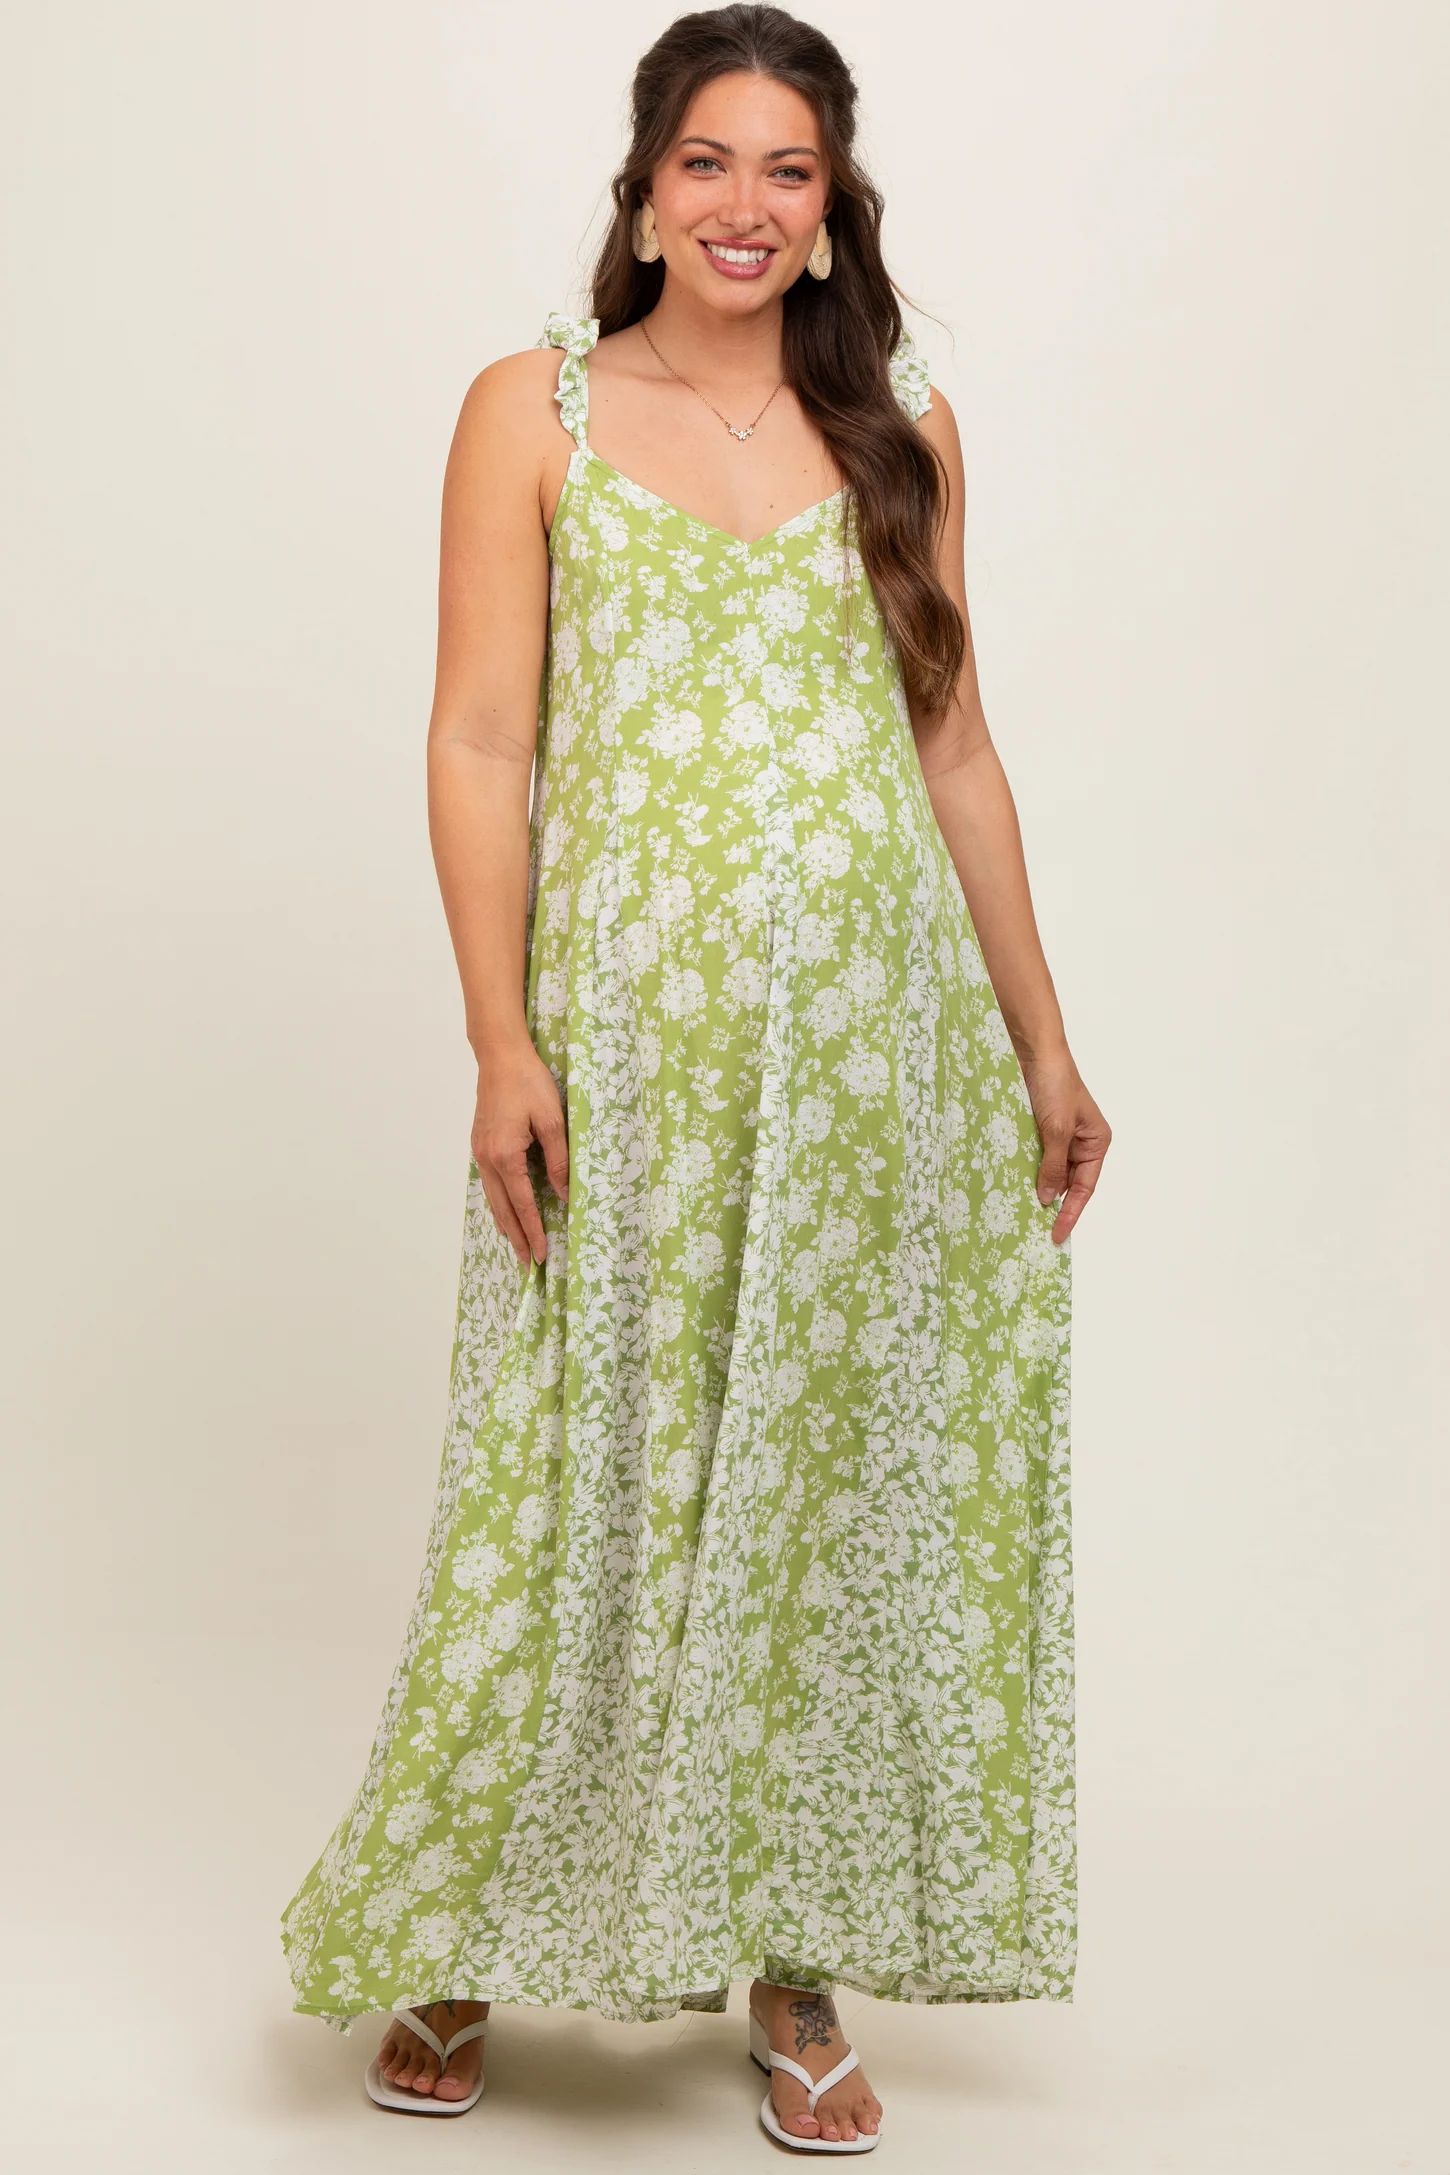 Lime Floral Ruffle Shoulder Cut-Out Back Maternity Maxi Dress | PinkBlush Maternity